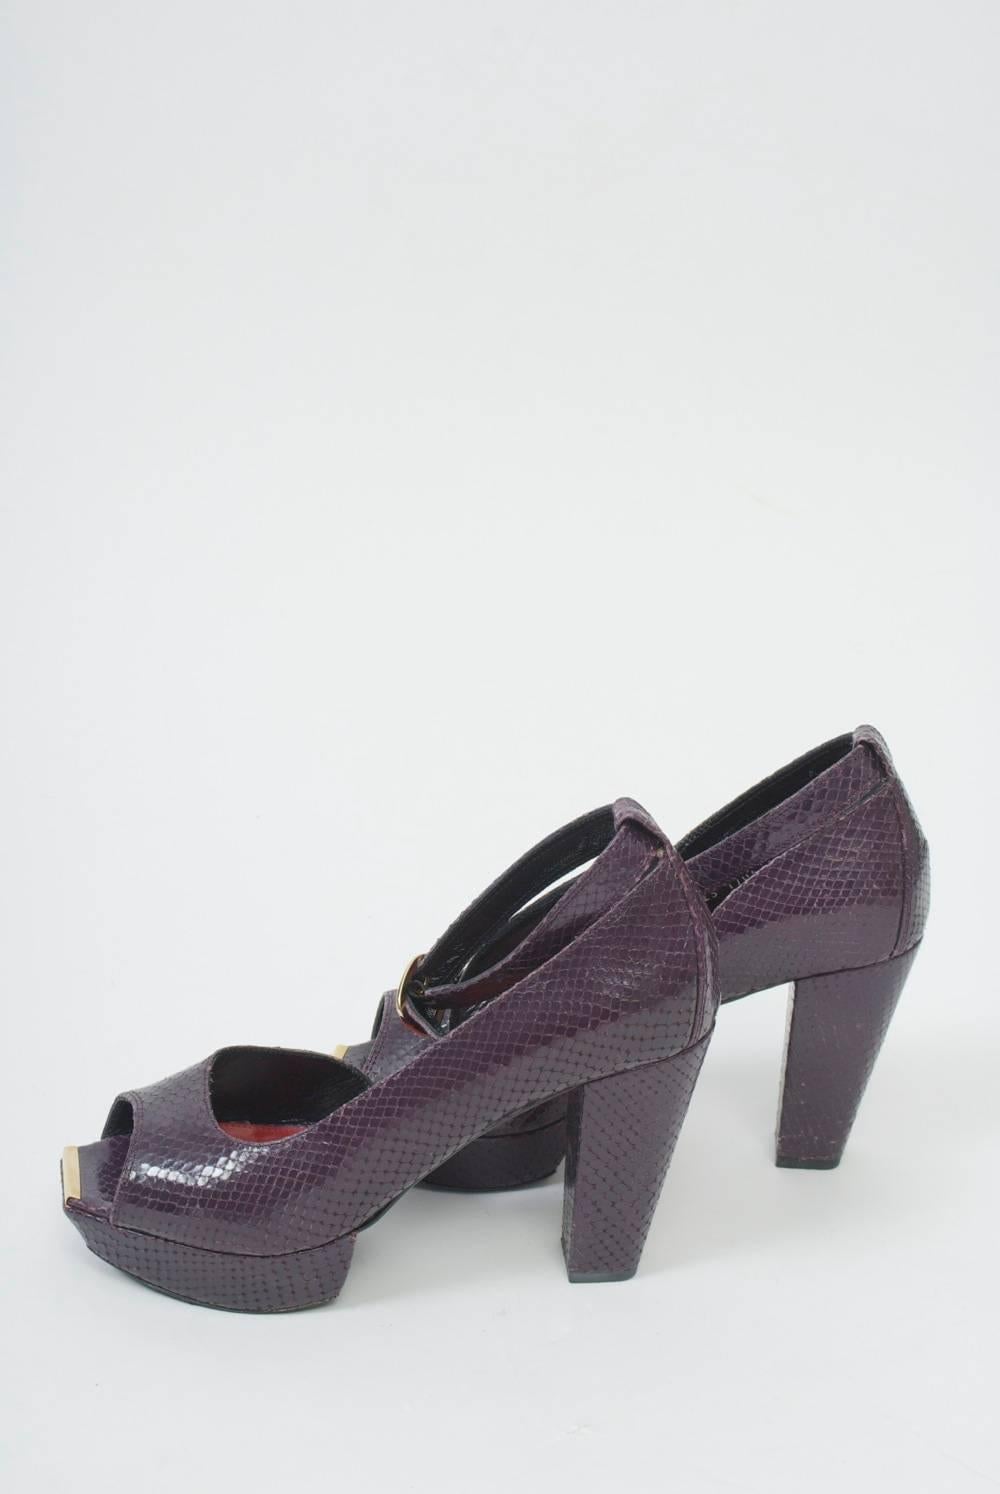 Open-toe platform shoes in plum-colored snakeskin by Robert Clergerie featuring ankle straps, a thick high heel and gold bars under the toes. Retailed by Barney's. The shoes show minimal wear.